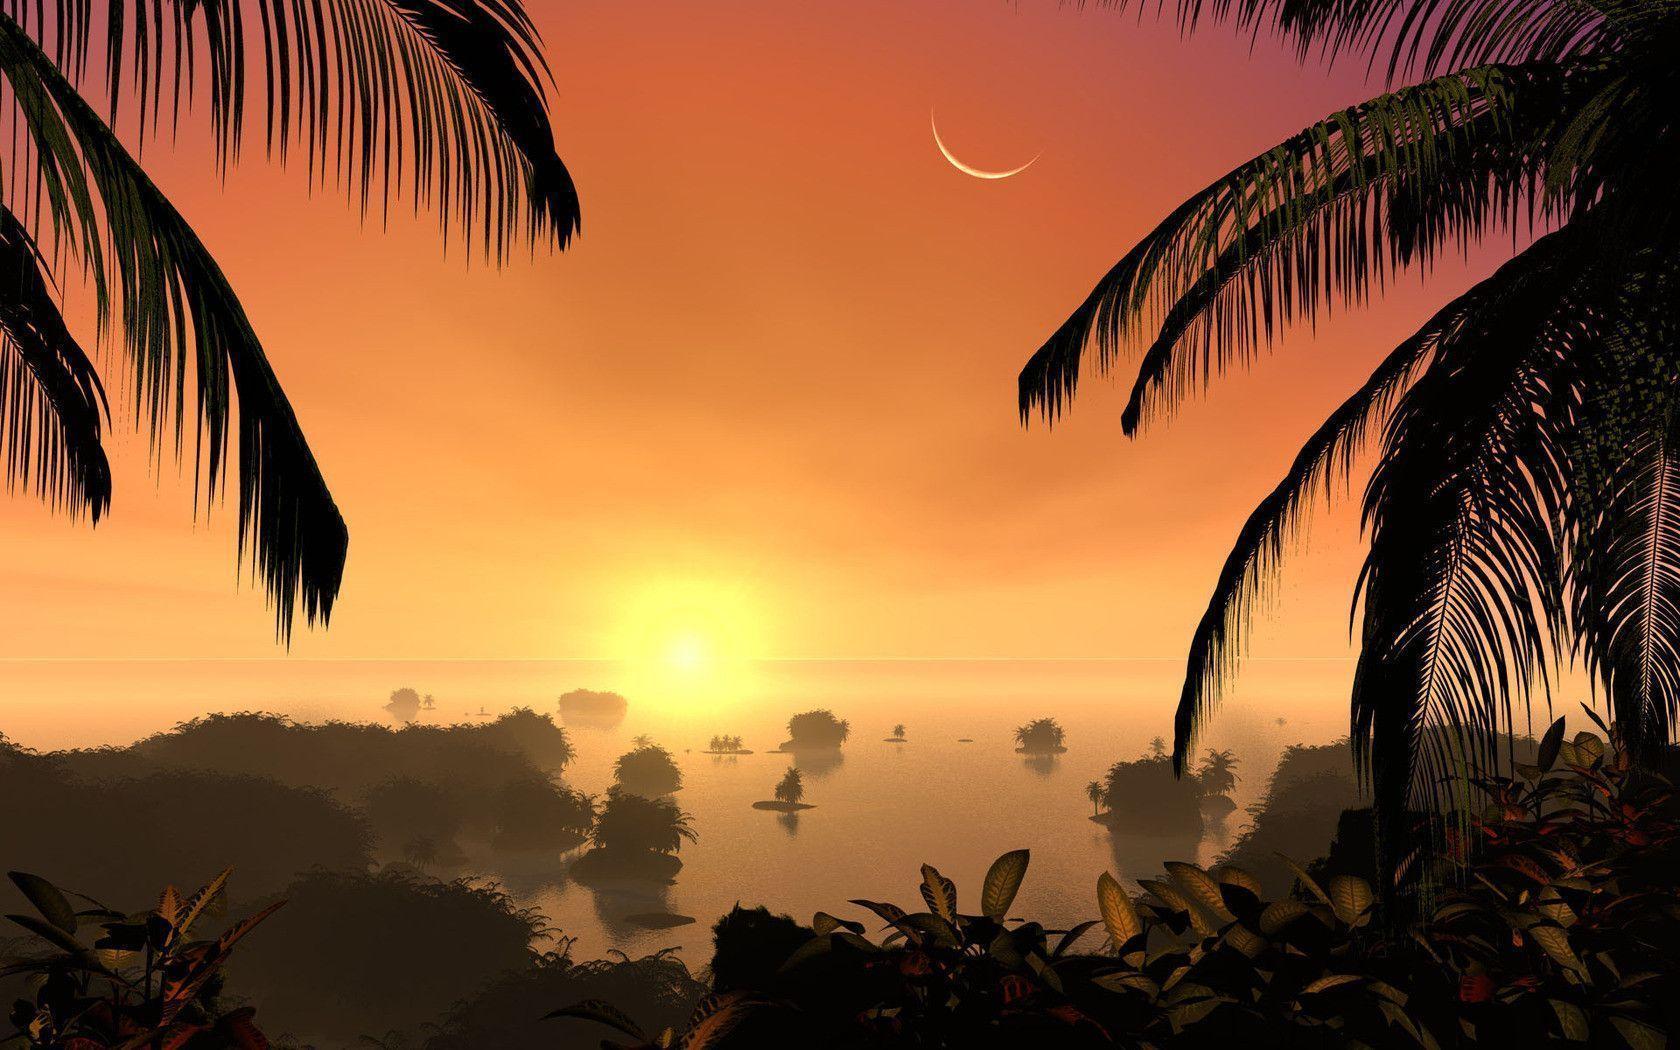 Tropical Island Sunset Wallpapers